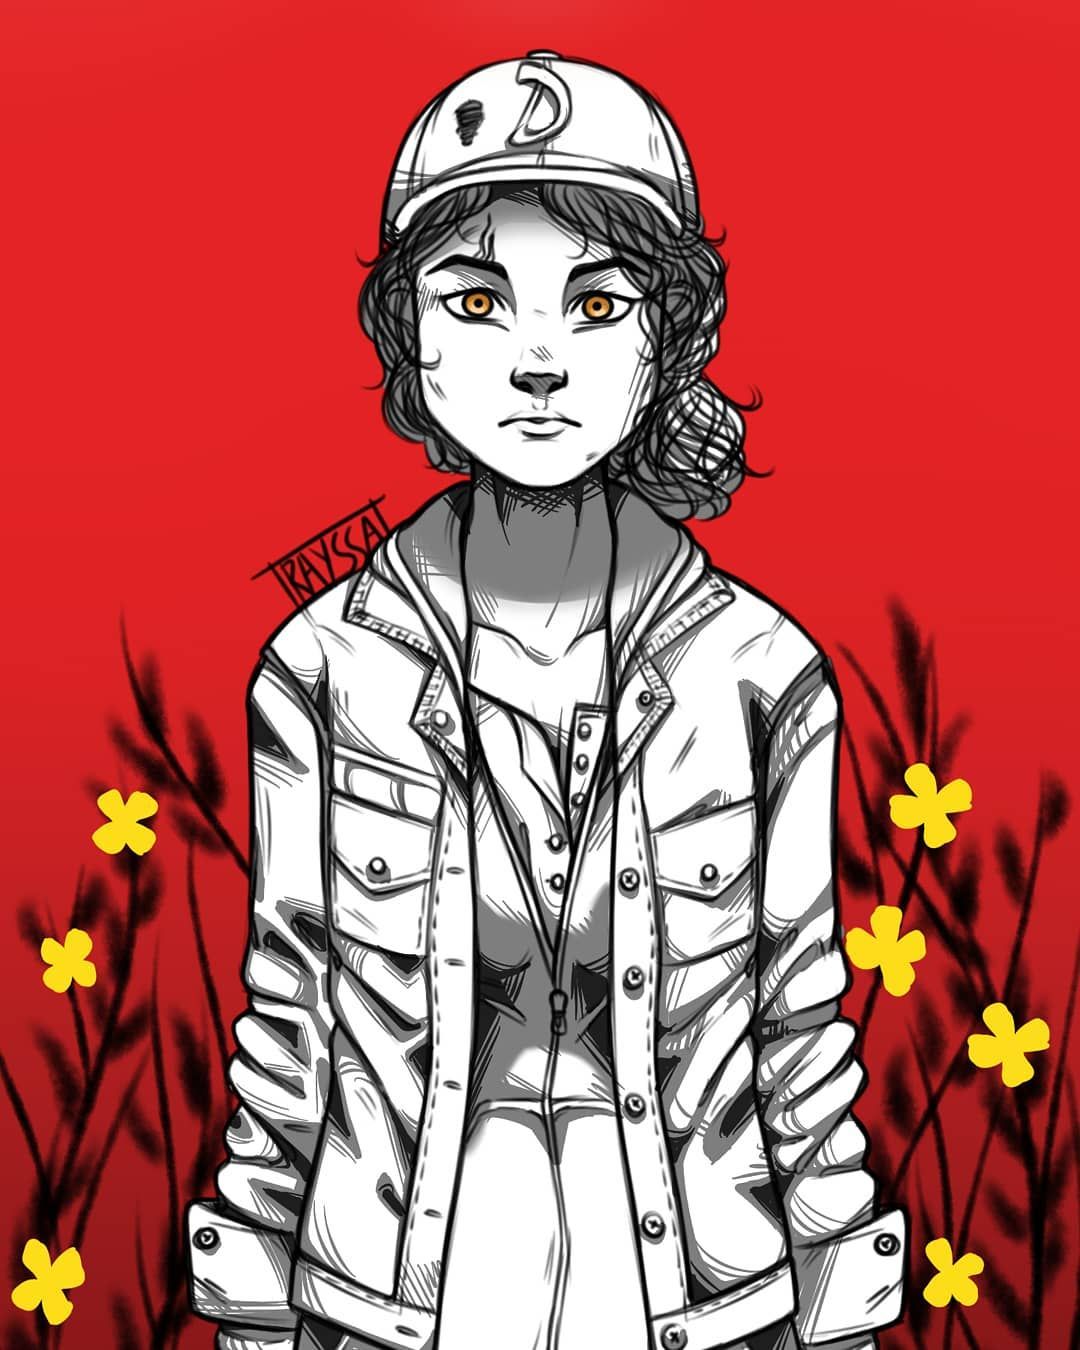 I Made This One Because Wanted A Clementine Wallpaper For My